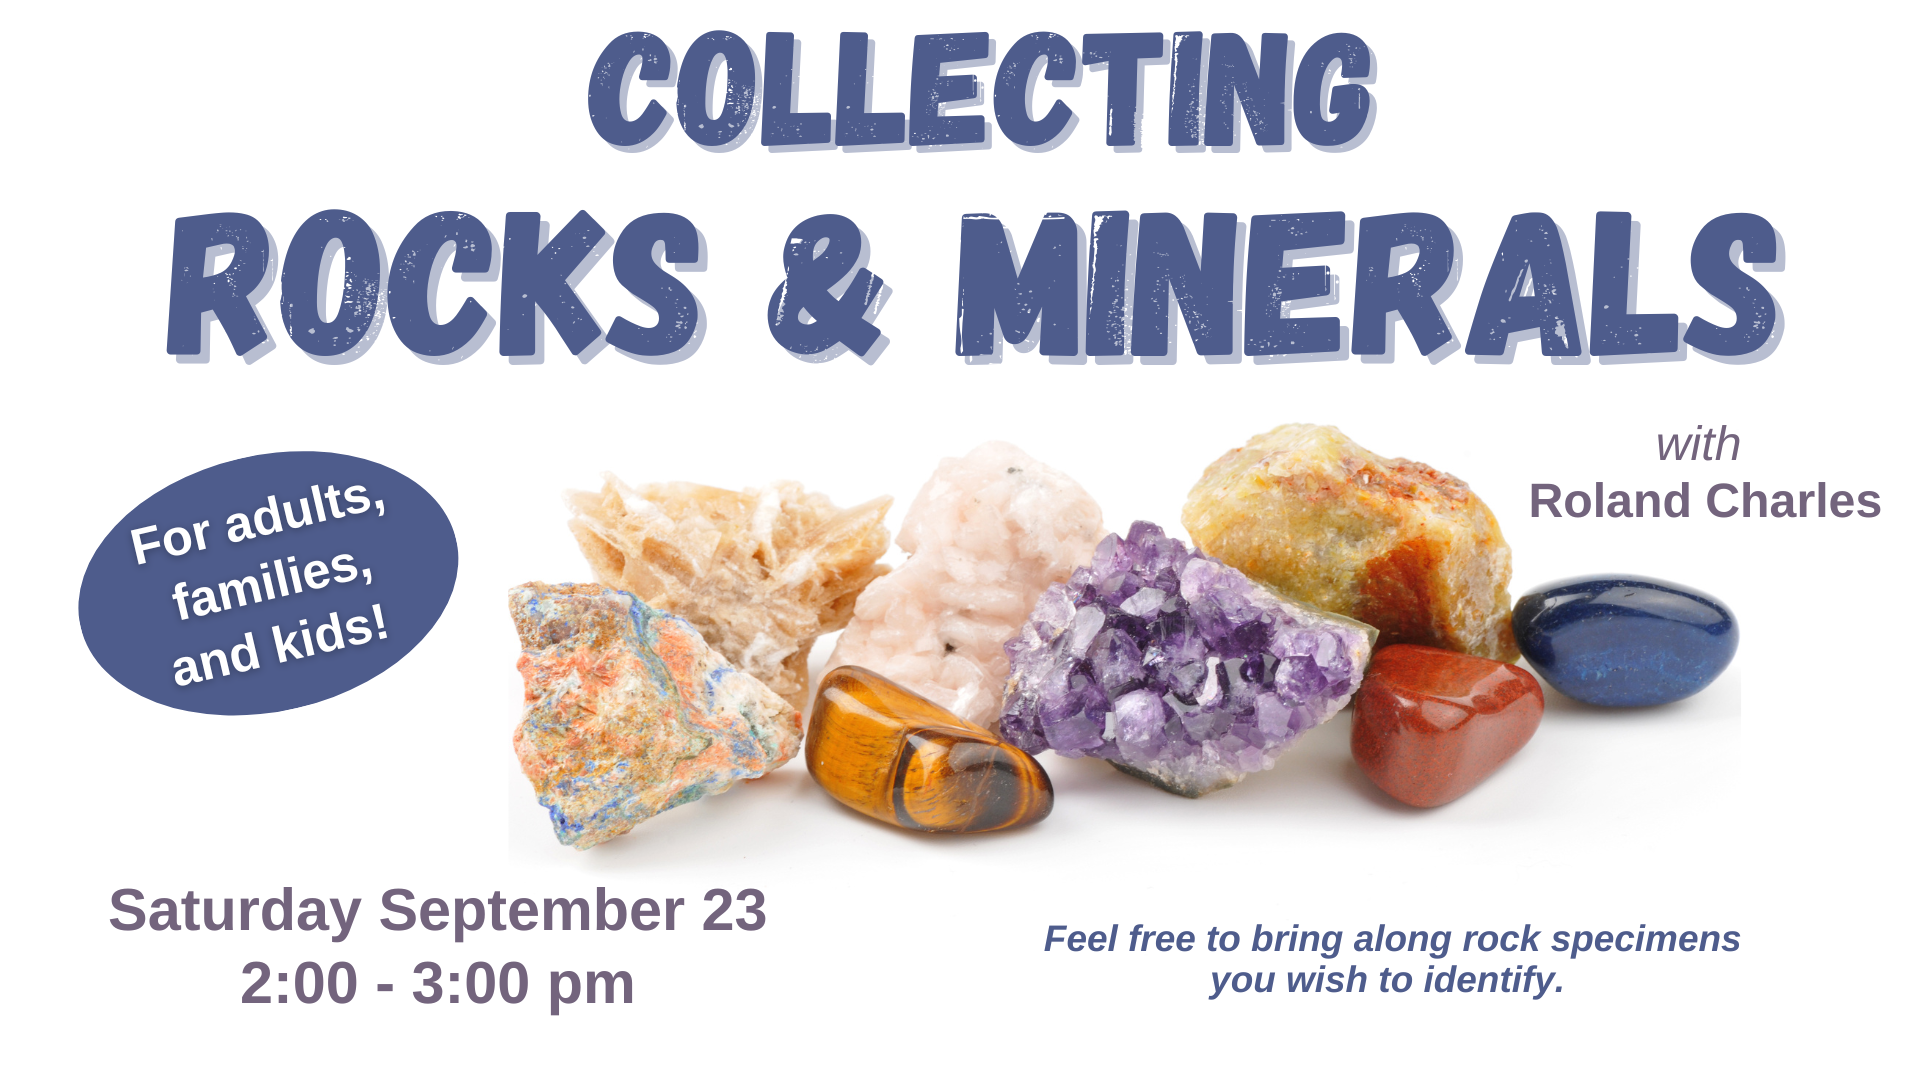 Collecting Rocks and Minerals with Roland Charles, Saturday, September 23 at 2:00 pm